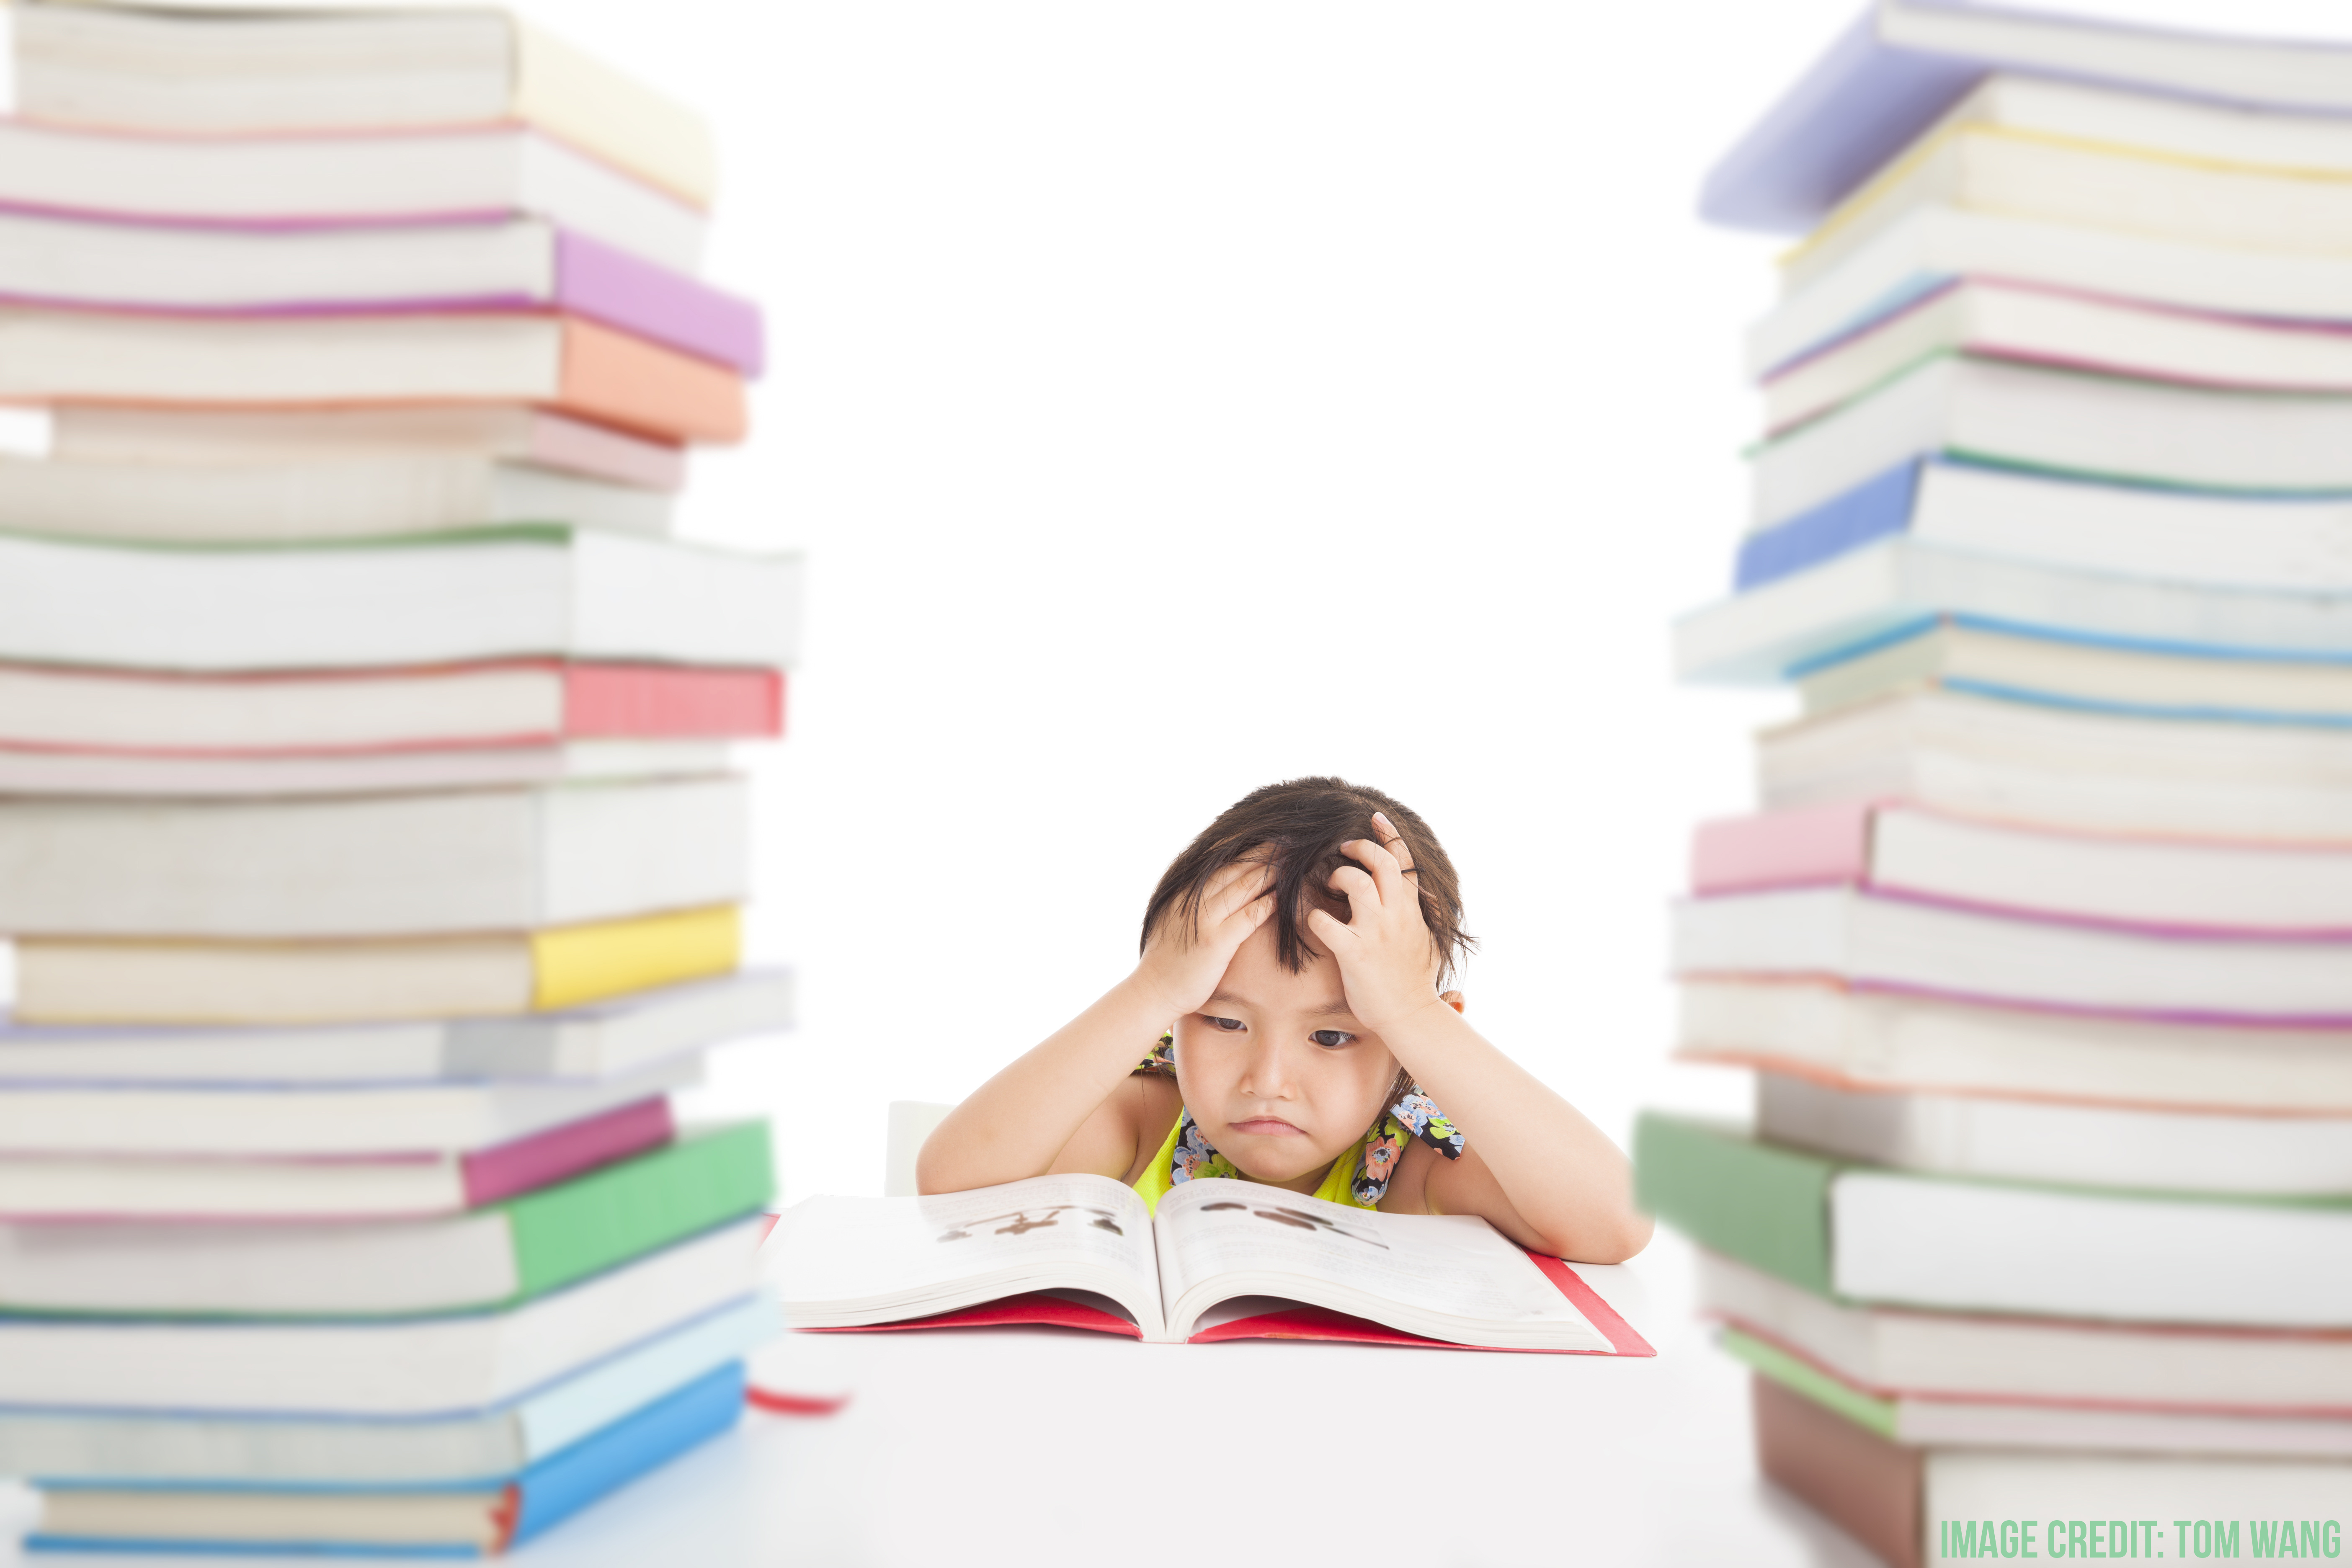 3 reasons why students should have less homework